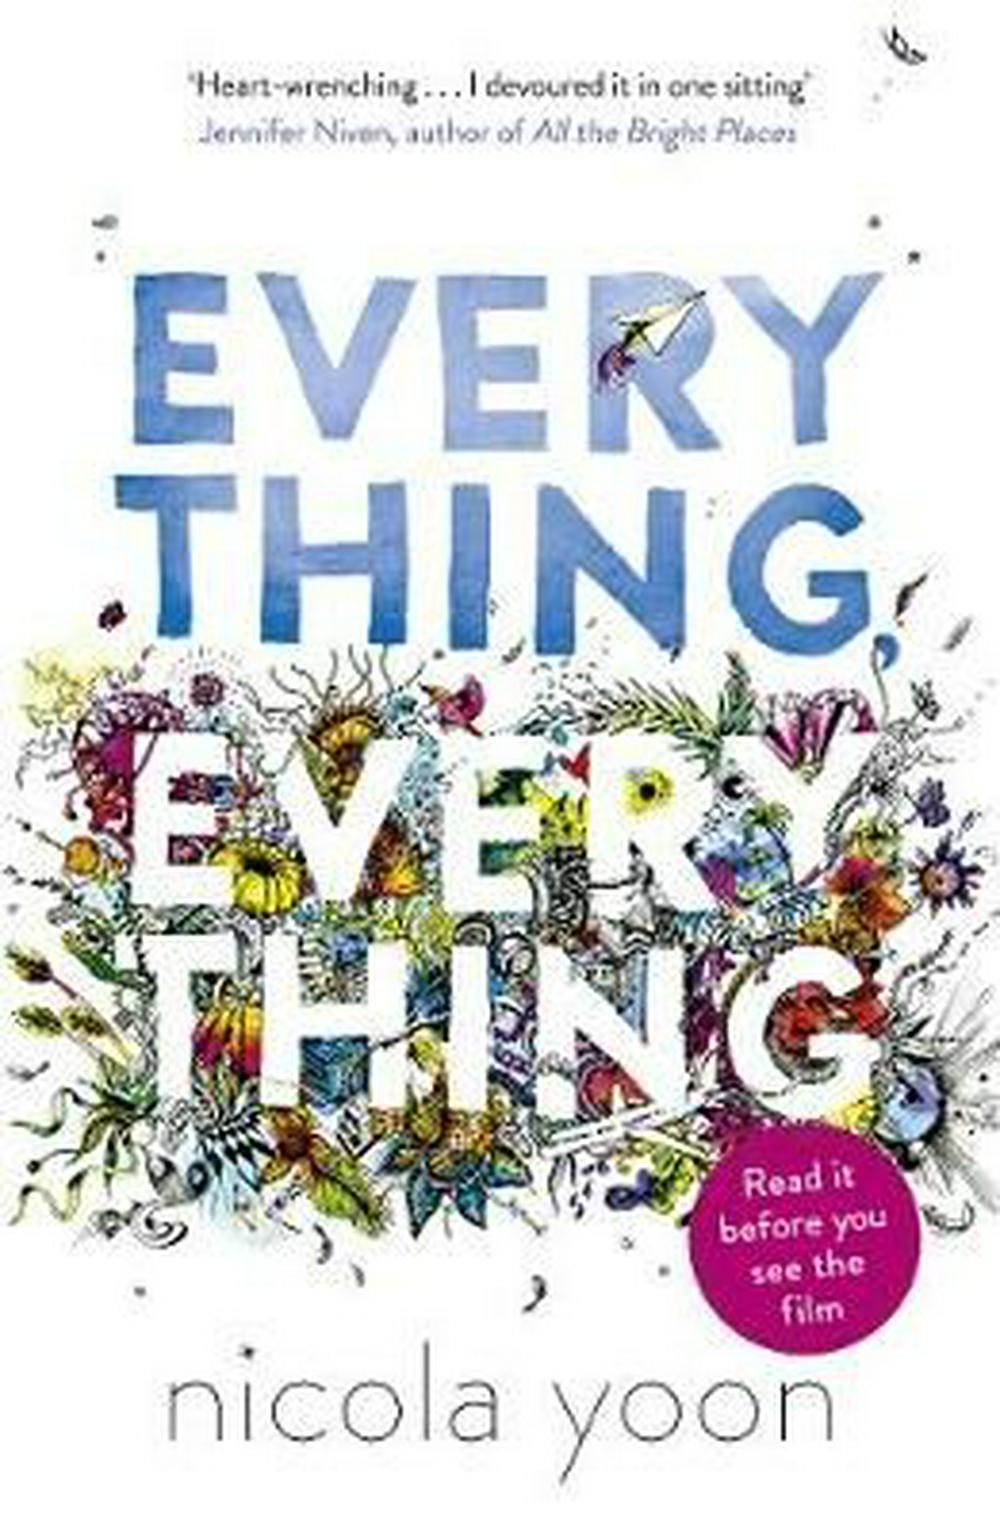 everything everything book cover